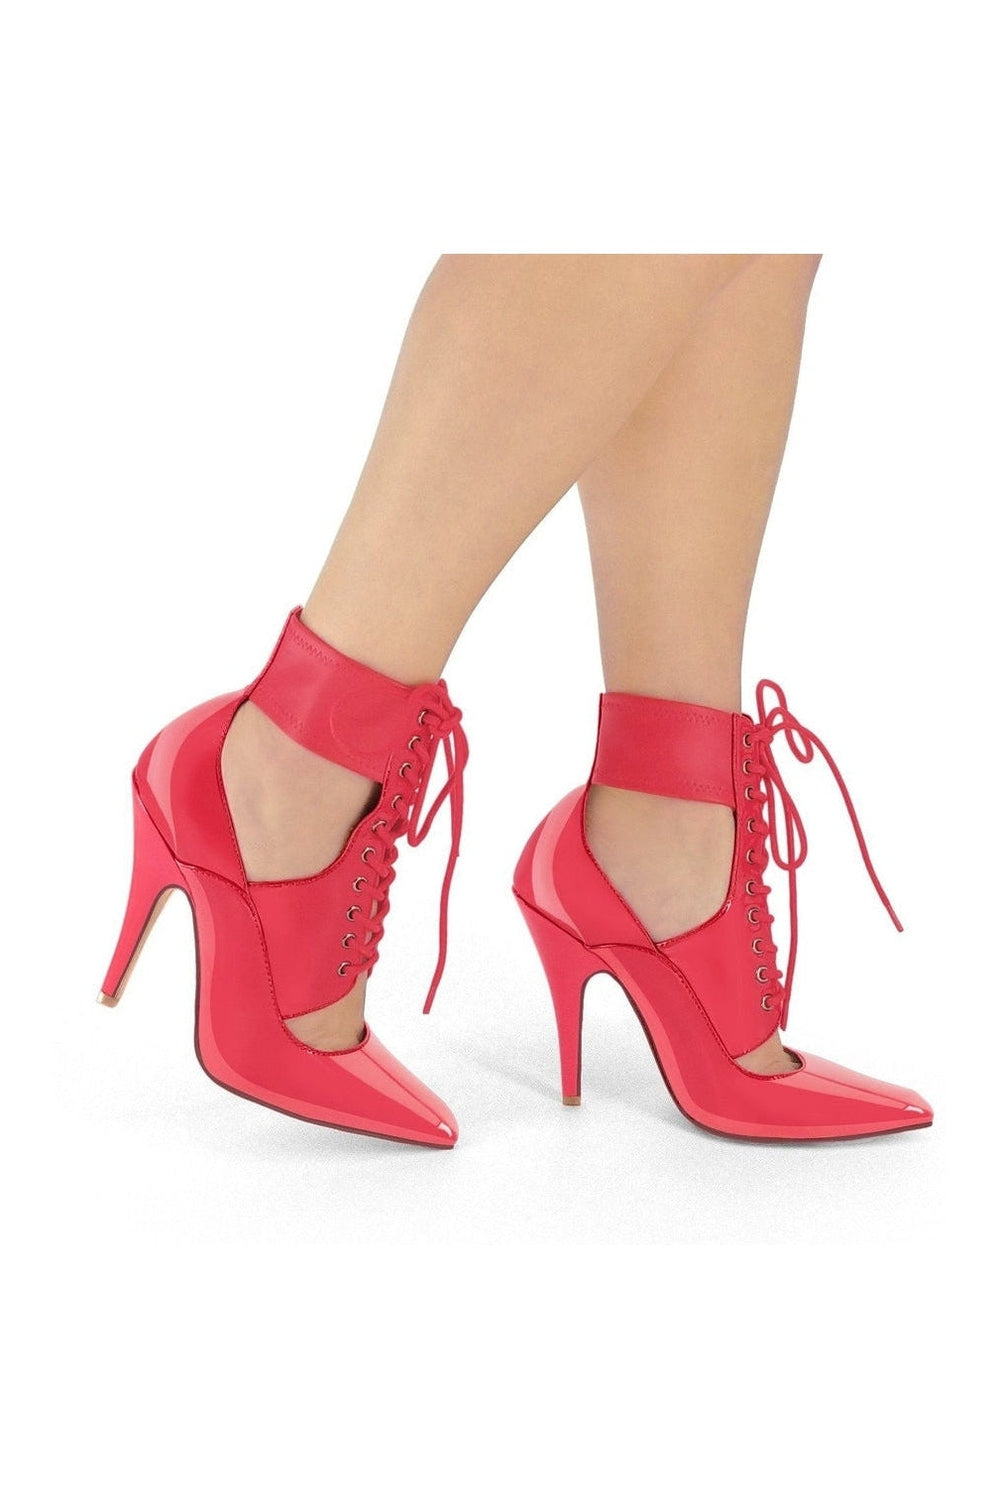 Lace Up Ankle Bootie with Stretch Ankle Cuff-Ankle Boots-Sexyshoes Signature-Red-SEXYSHOES.COM